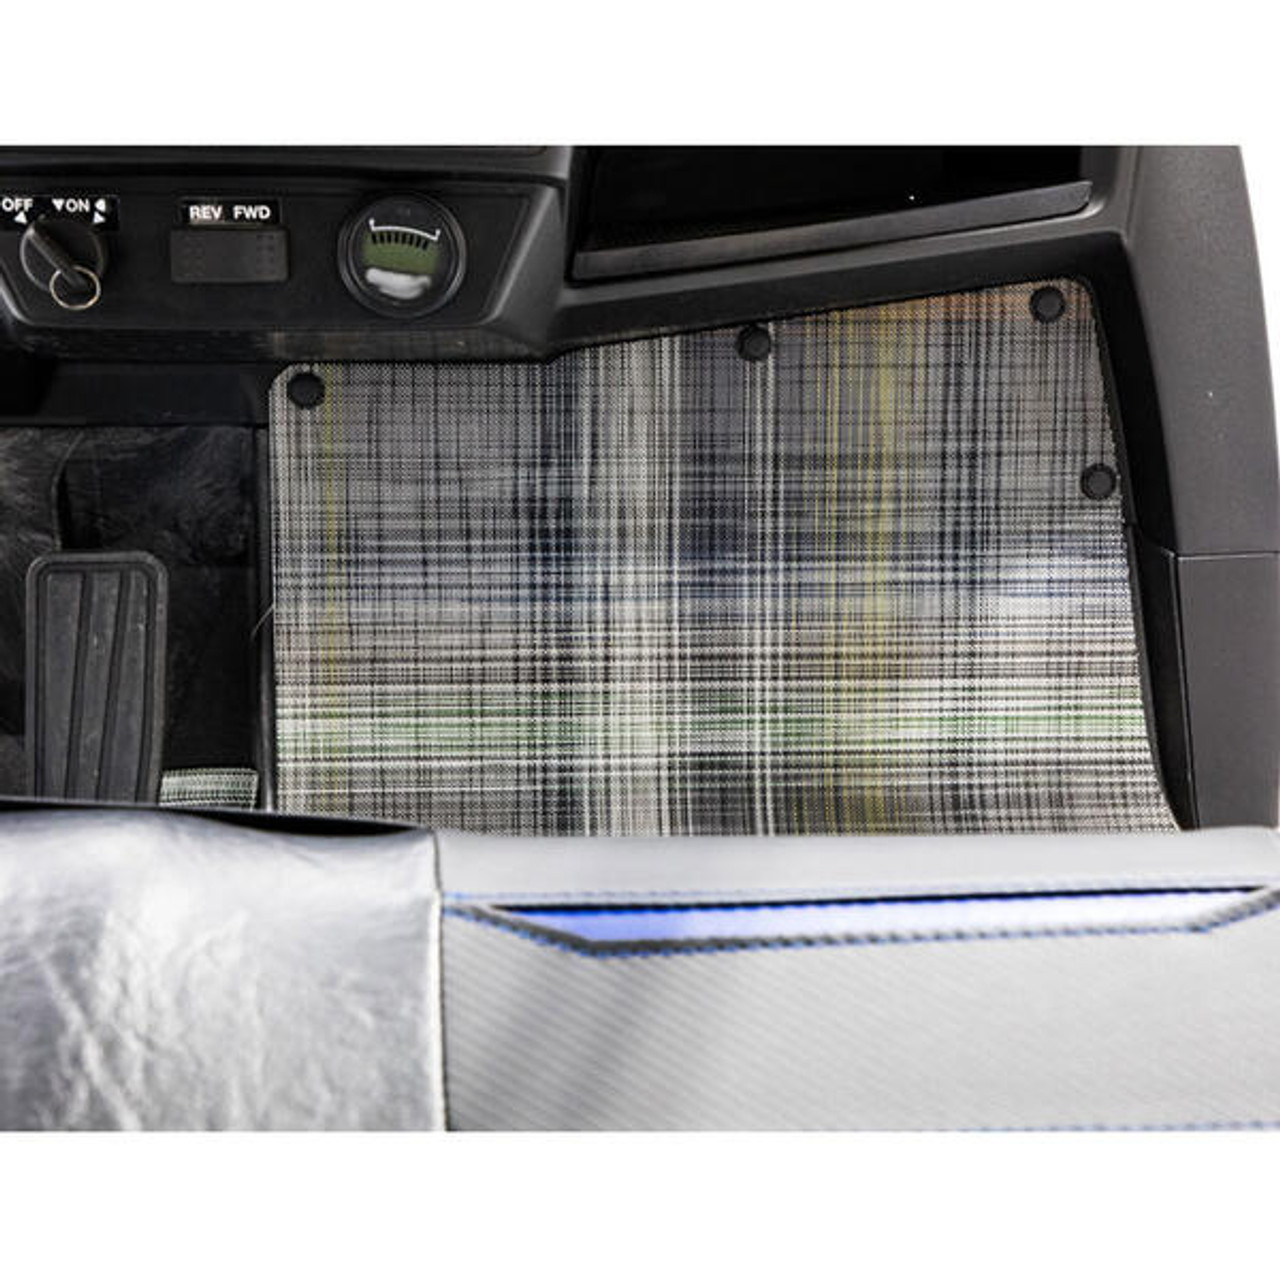 Chilewich Premium Gray Plaid Floor Mat for Yamaha Drive2 (2017-Up), 03-149